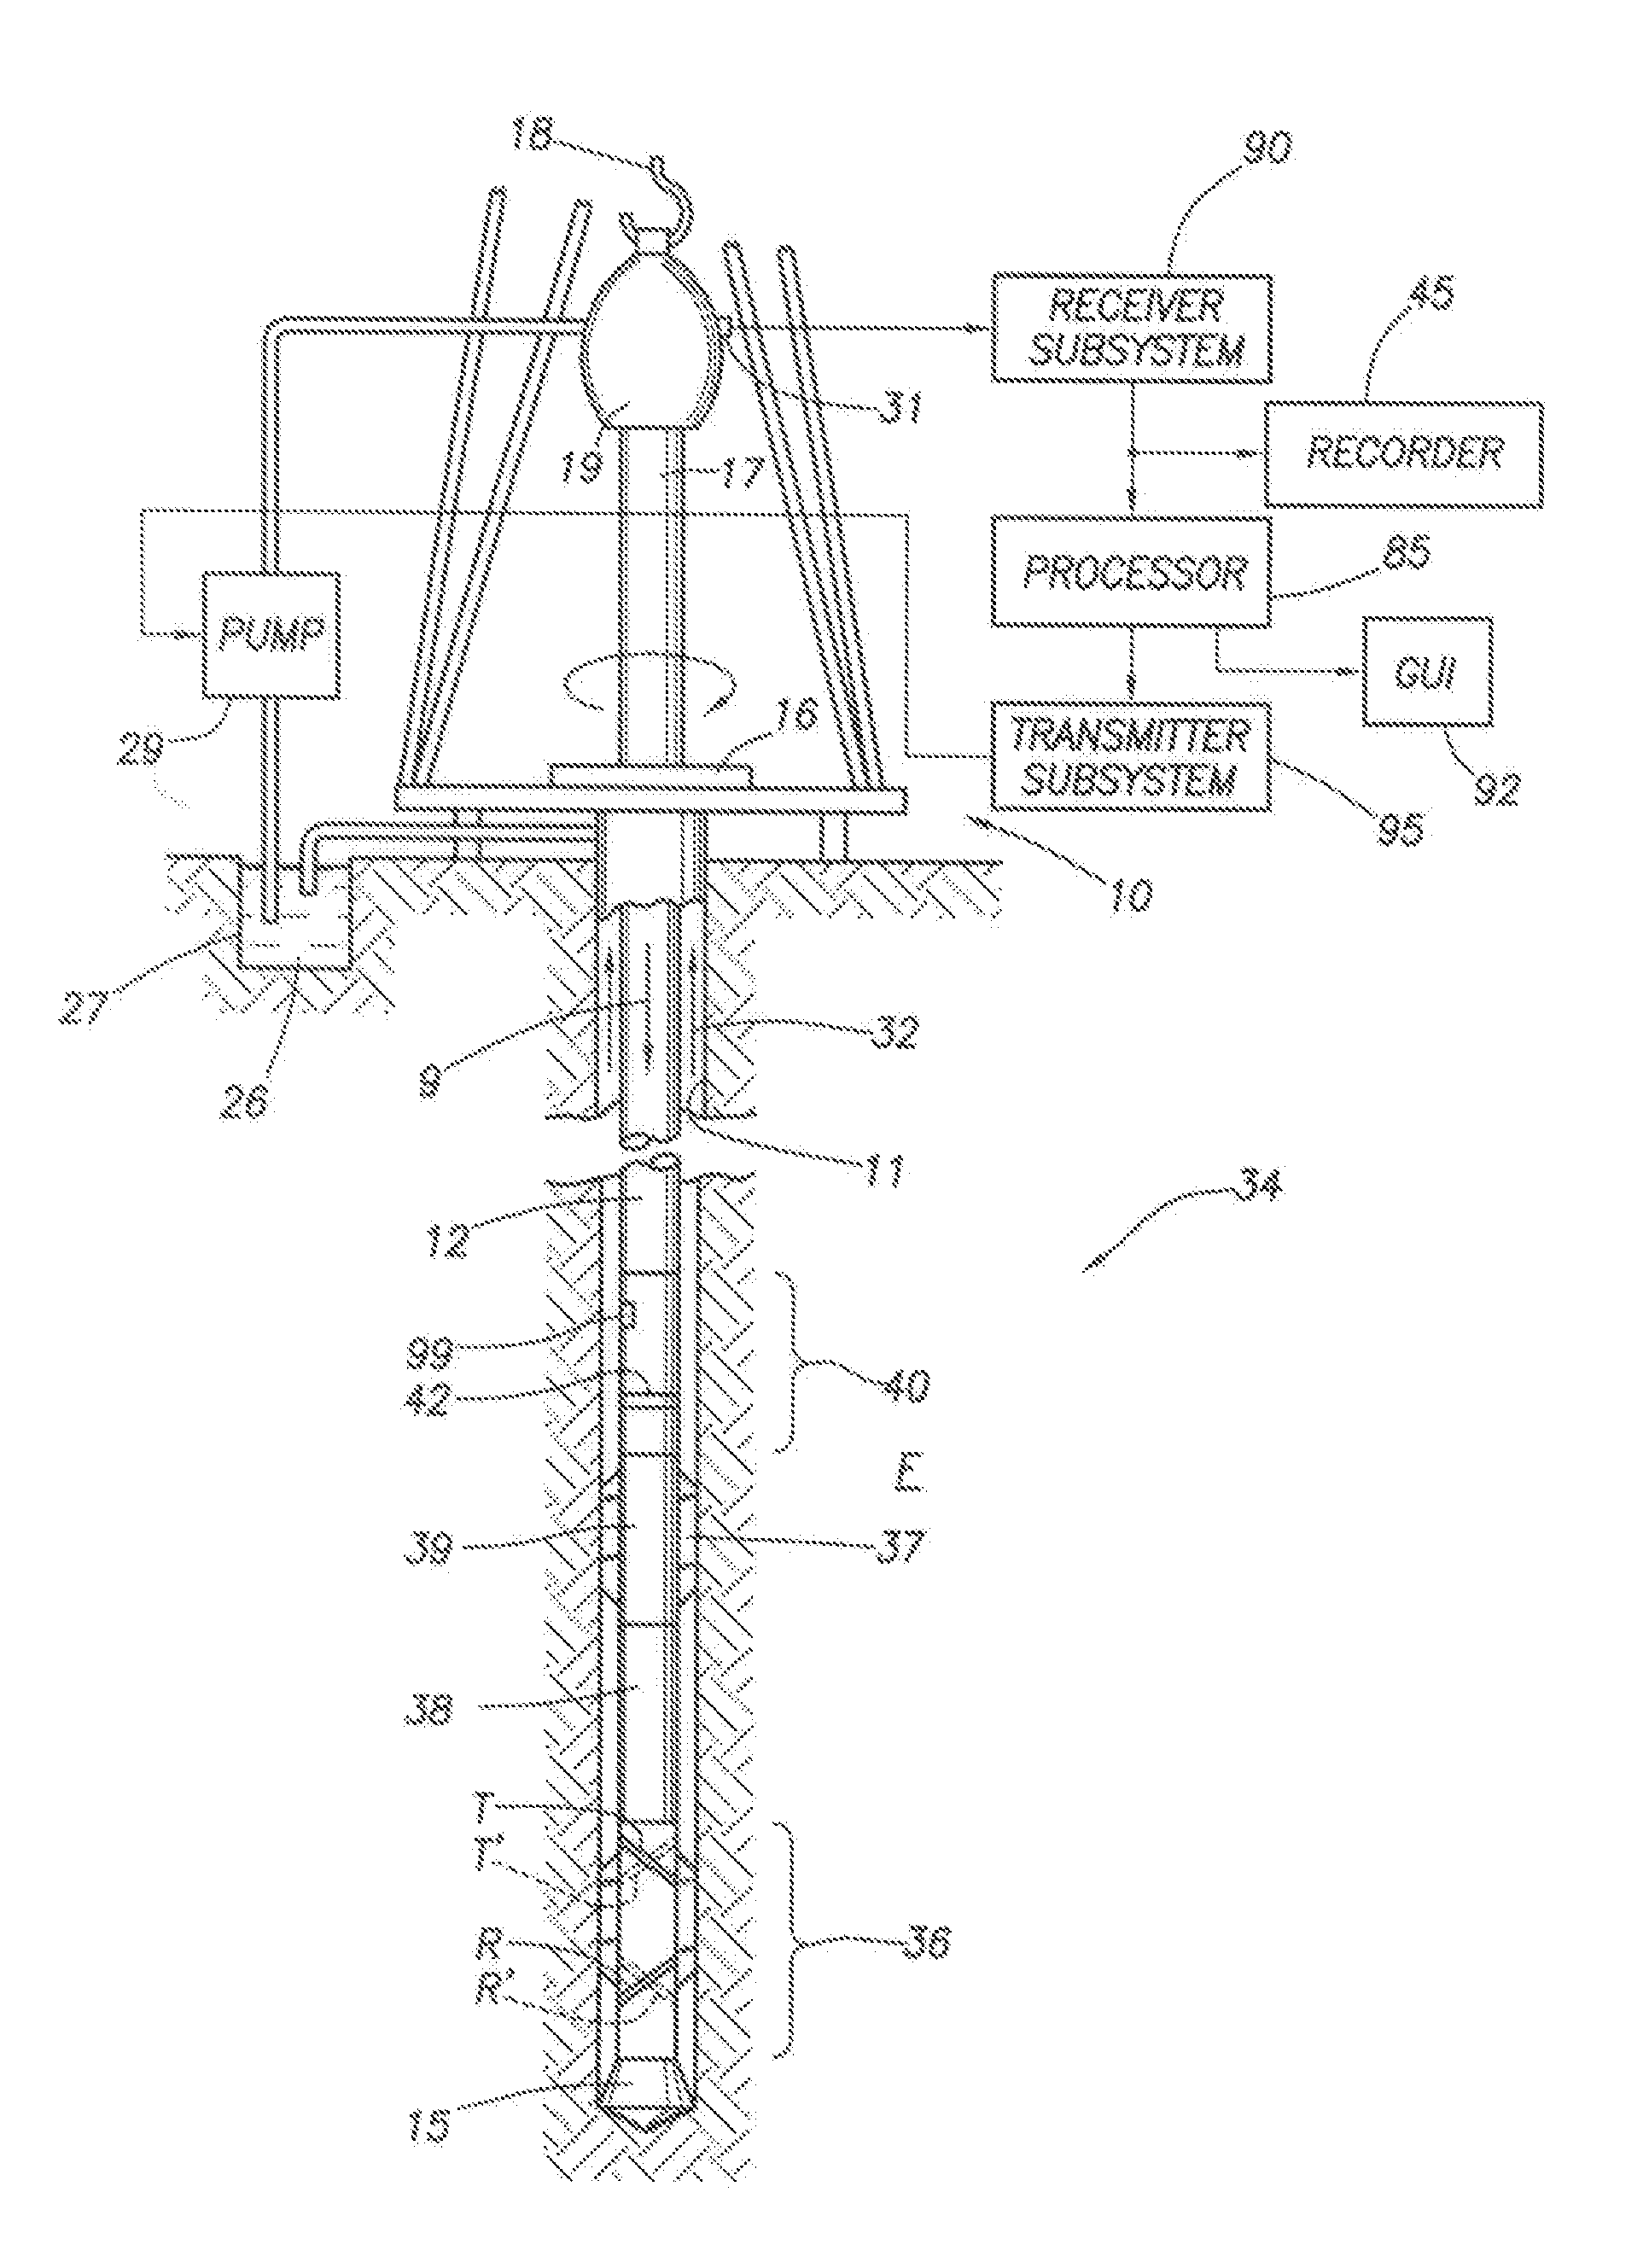 Method for characterizing a subsurface formation with a logging instrument disposed in a borehole penetrating the formation